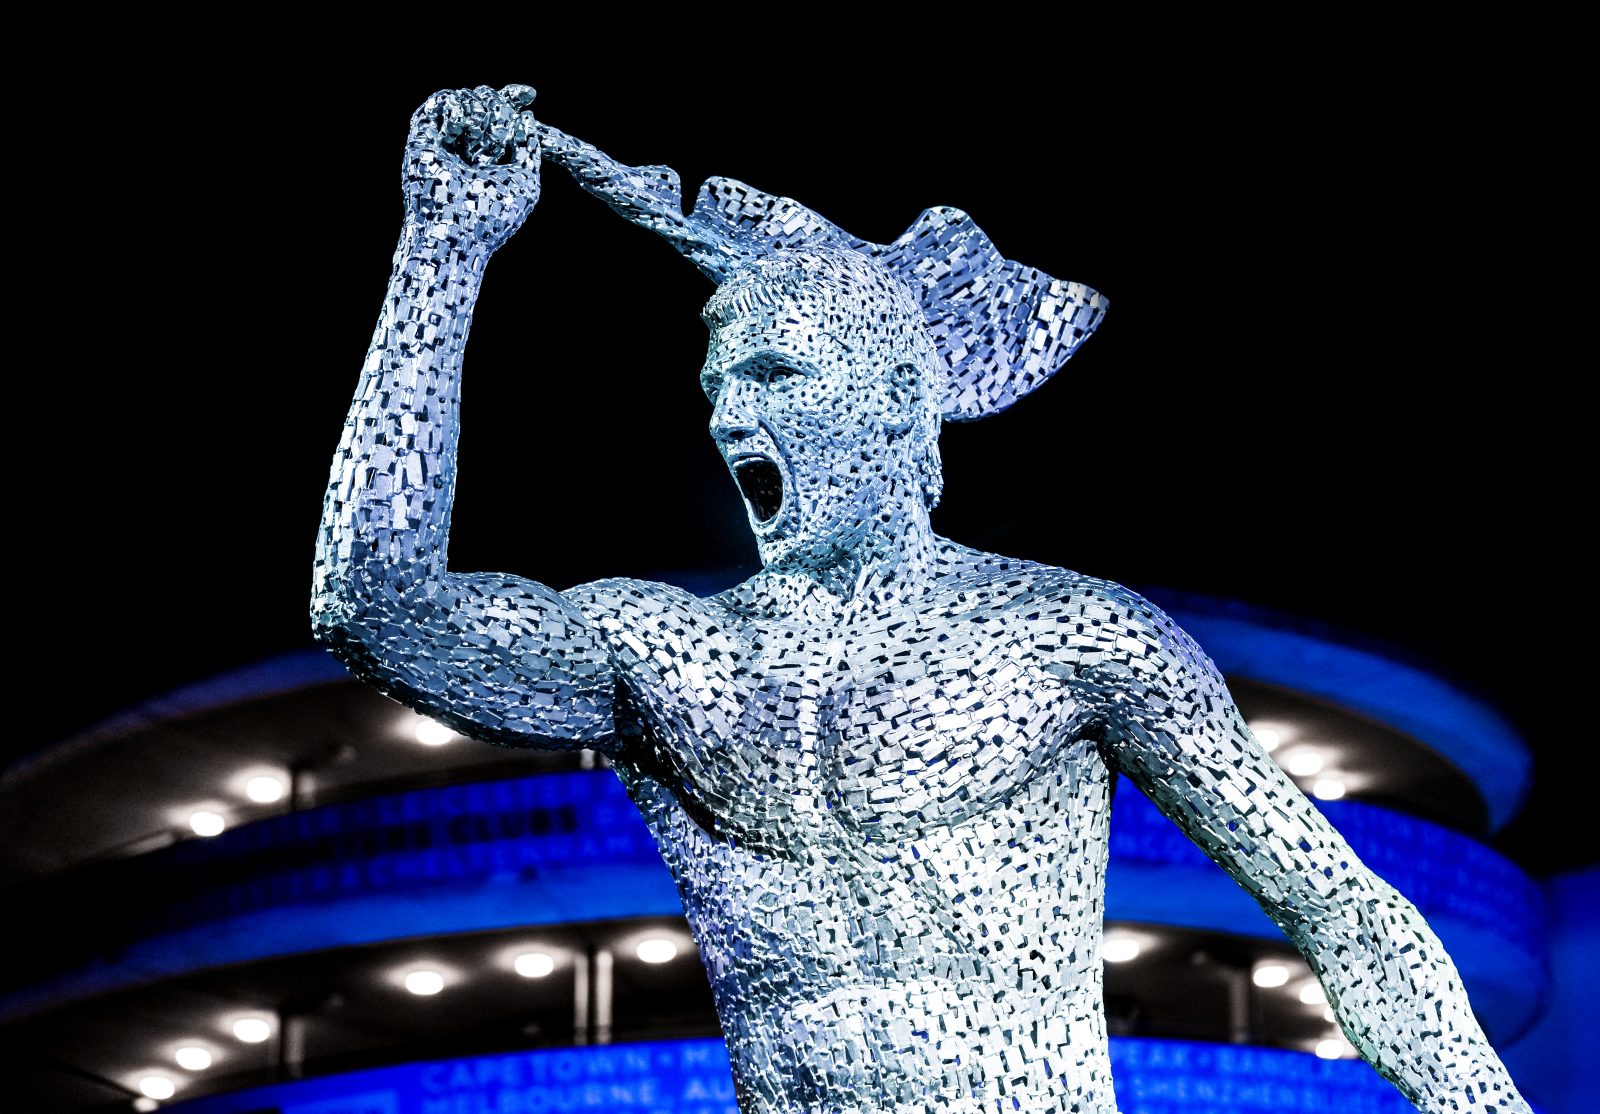 Enormous Sergio Aguero statue unveiled at Manchester City ground, The Manc